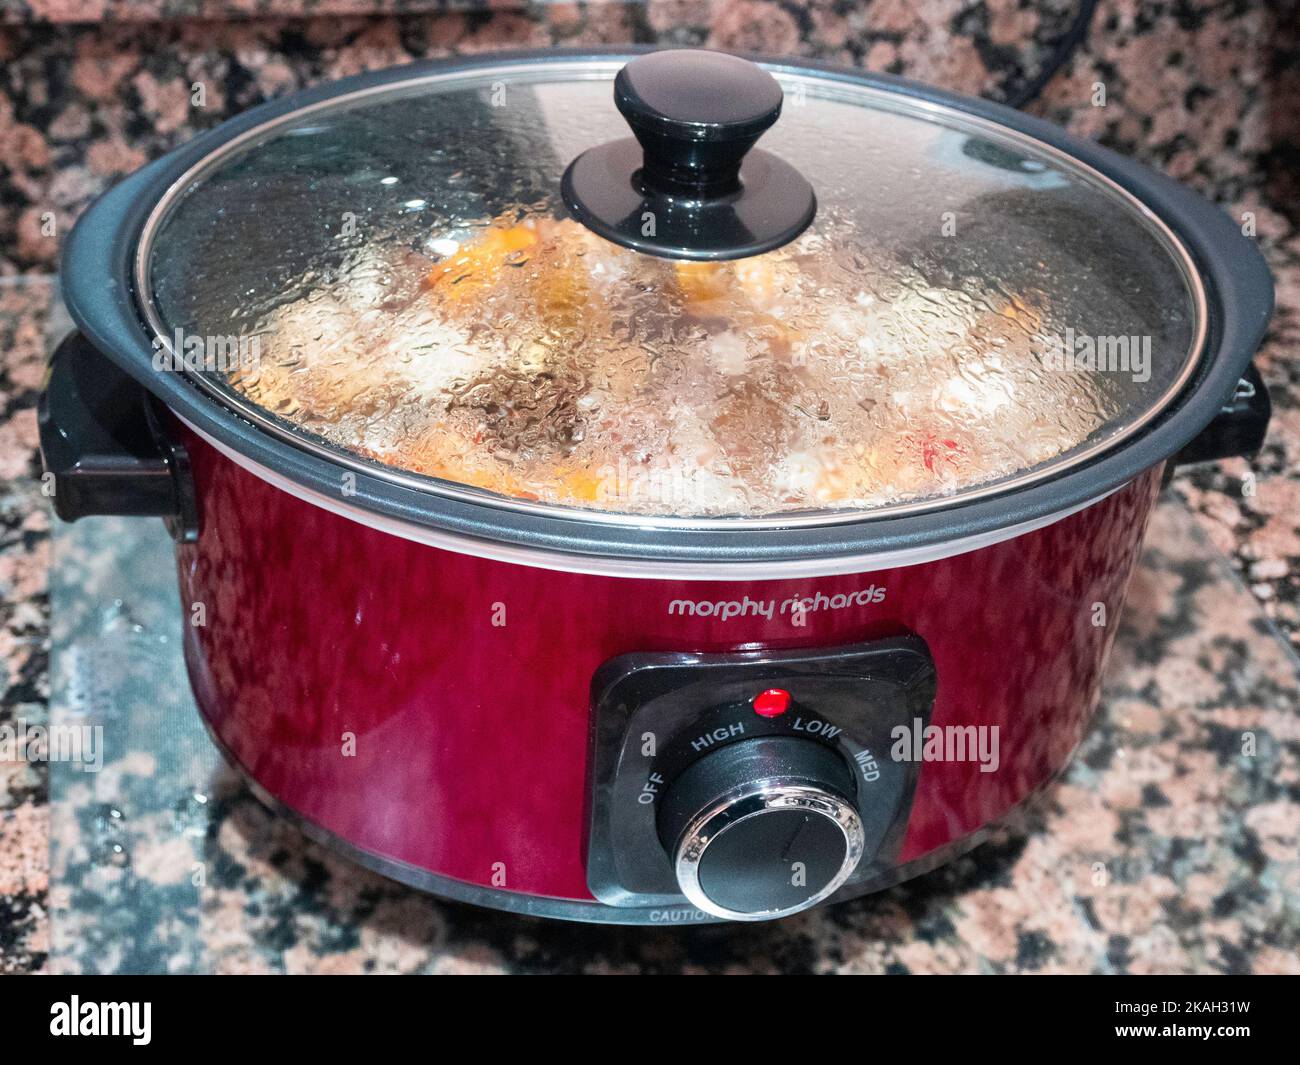 A Morphy Richards  slow cooker kitchen electrical appliance which cooks a prepared stew overnight delivering tasty food with low energy consumption Stock Photo